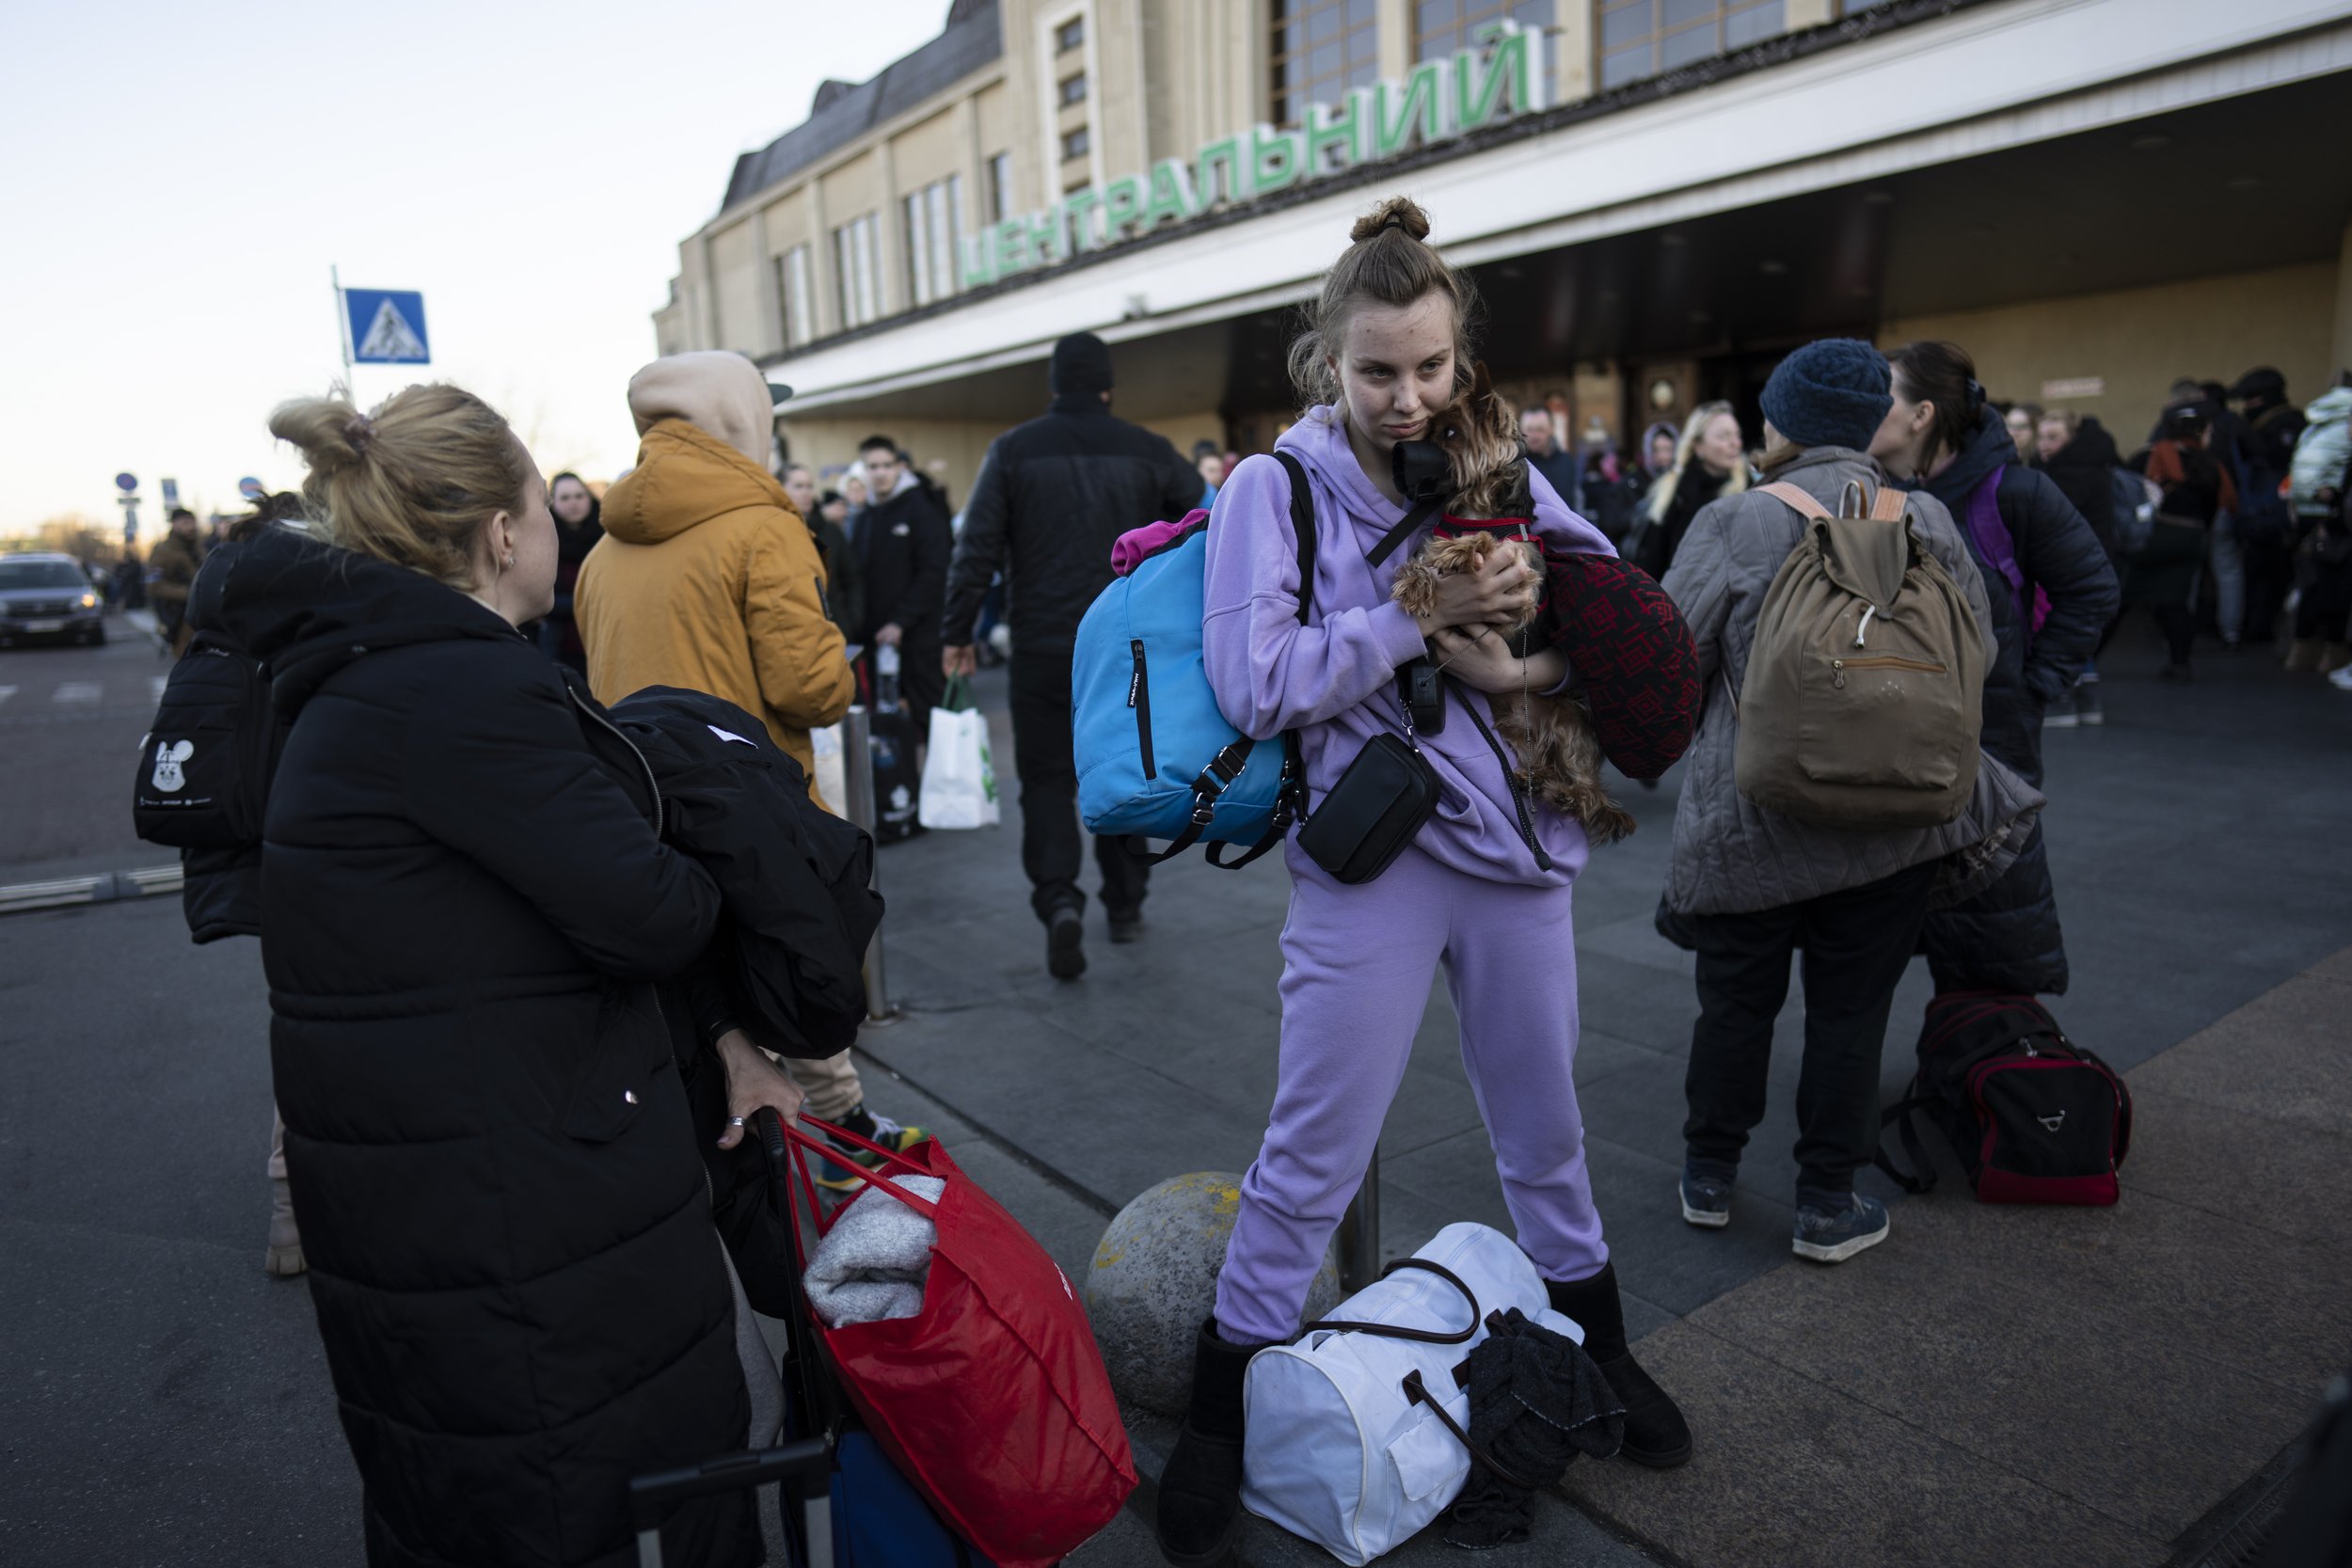  Daryna Kovalenko, 19 , holds her dog Tim, while arriving at Kyiv's train station after leaving her home in Chernihiv, Ukraine, through a humanitarian corridor, Monday, March 21, 2022. (AP Photo/ (AP Photo/Rodrigo Abd) 